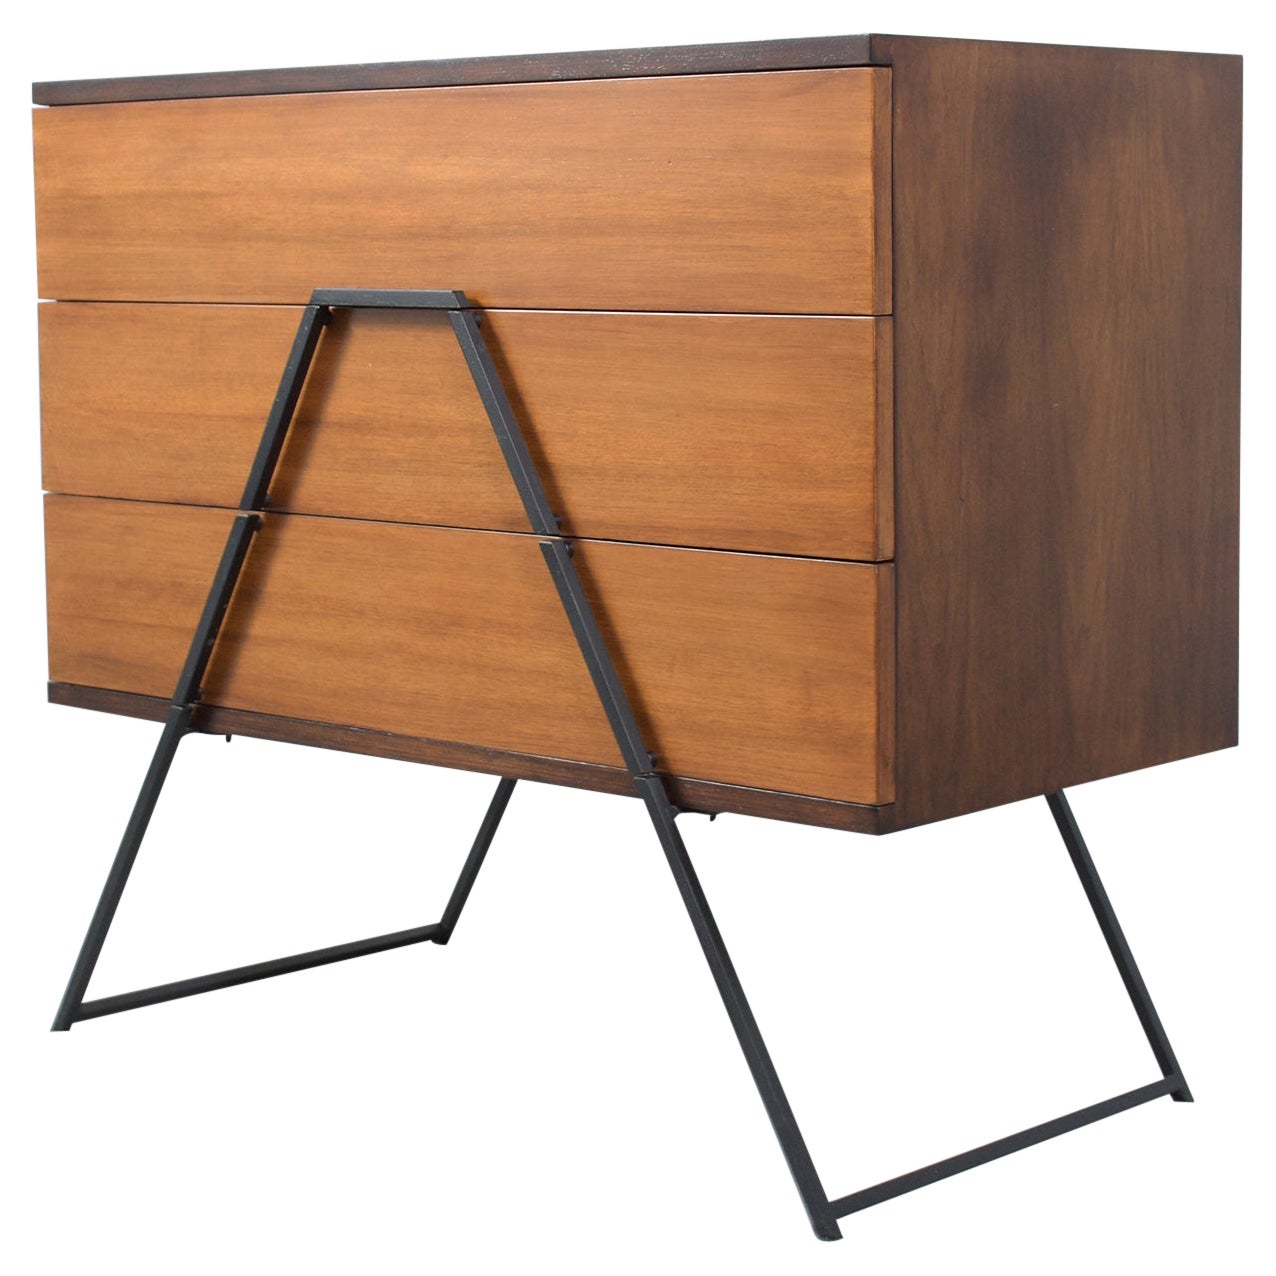 Restored 1960s Mid-Century Modern Wood Chest with Wrought Iron Handles For Sale